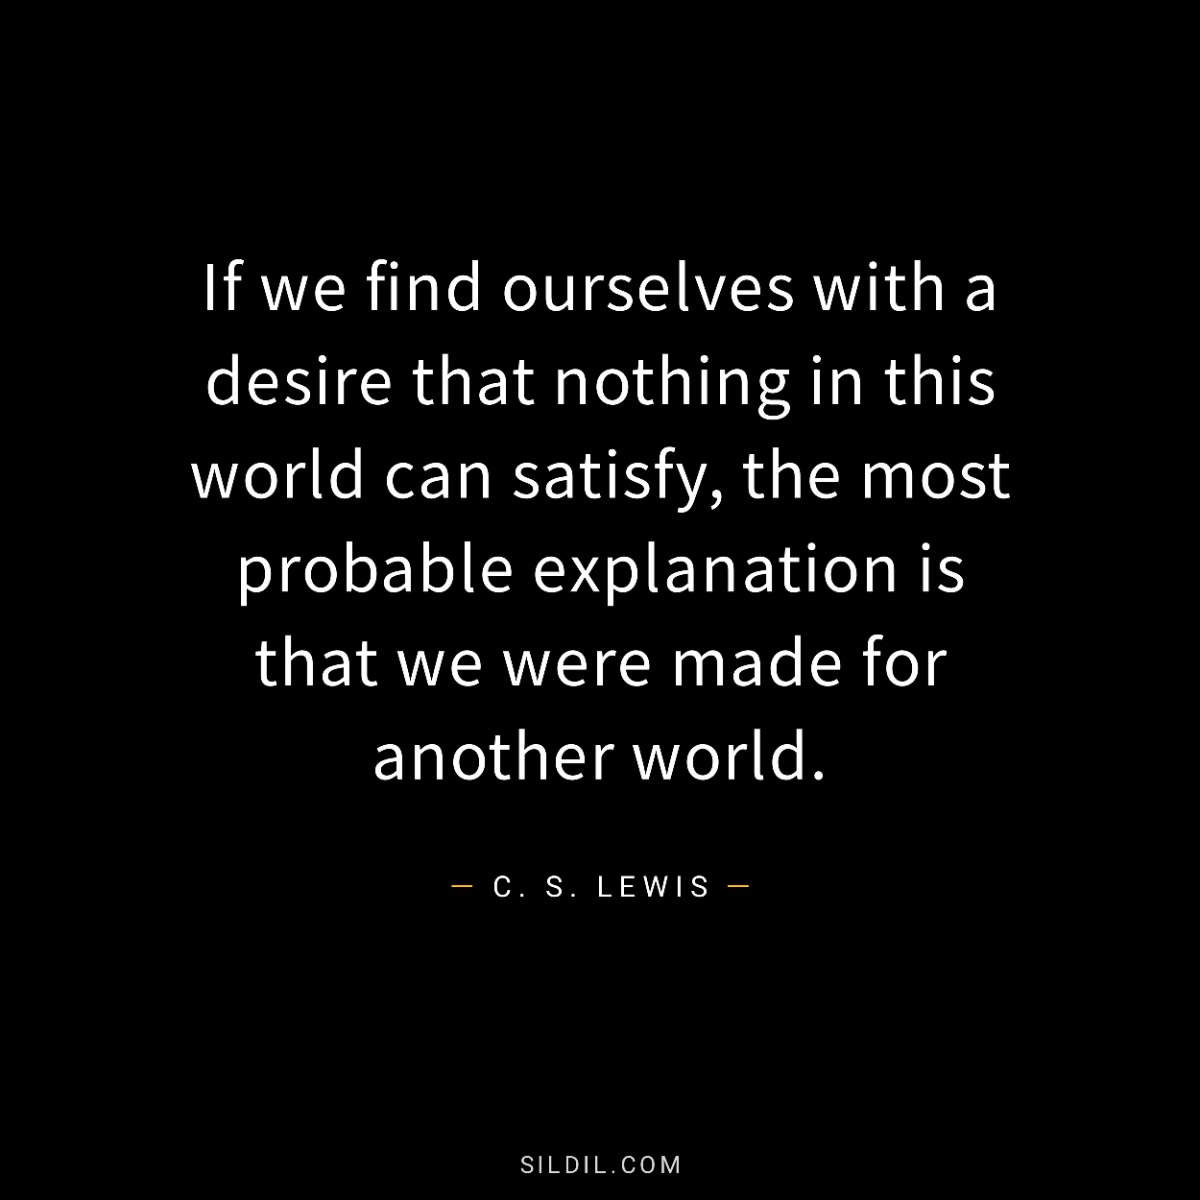 If we find ourselves with a desire that nothing in this world can satisfy, the most probable explanation is that we were made for another world.